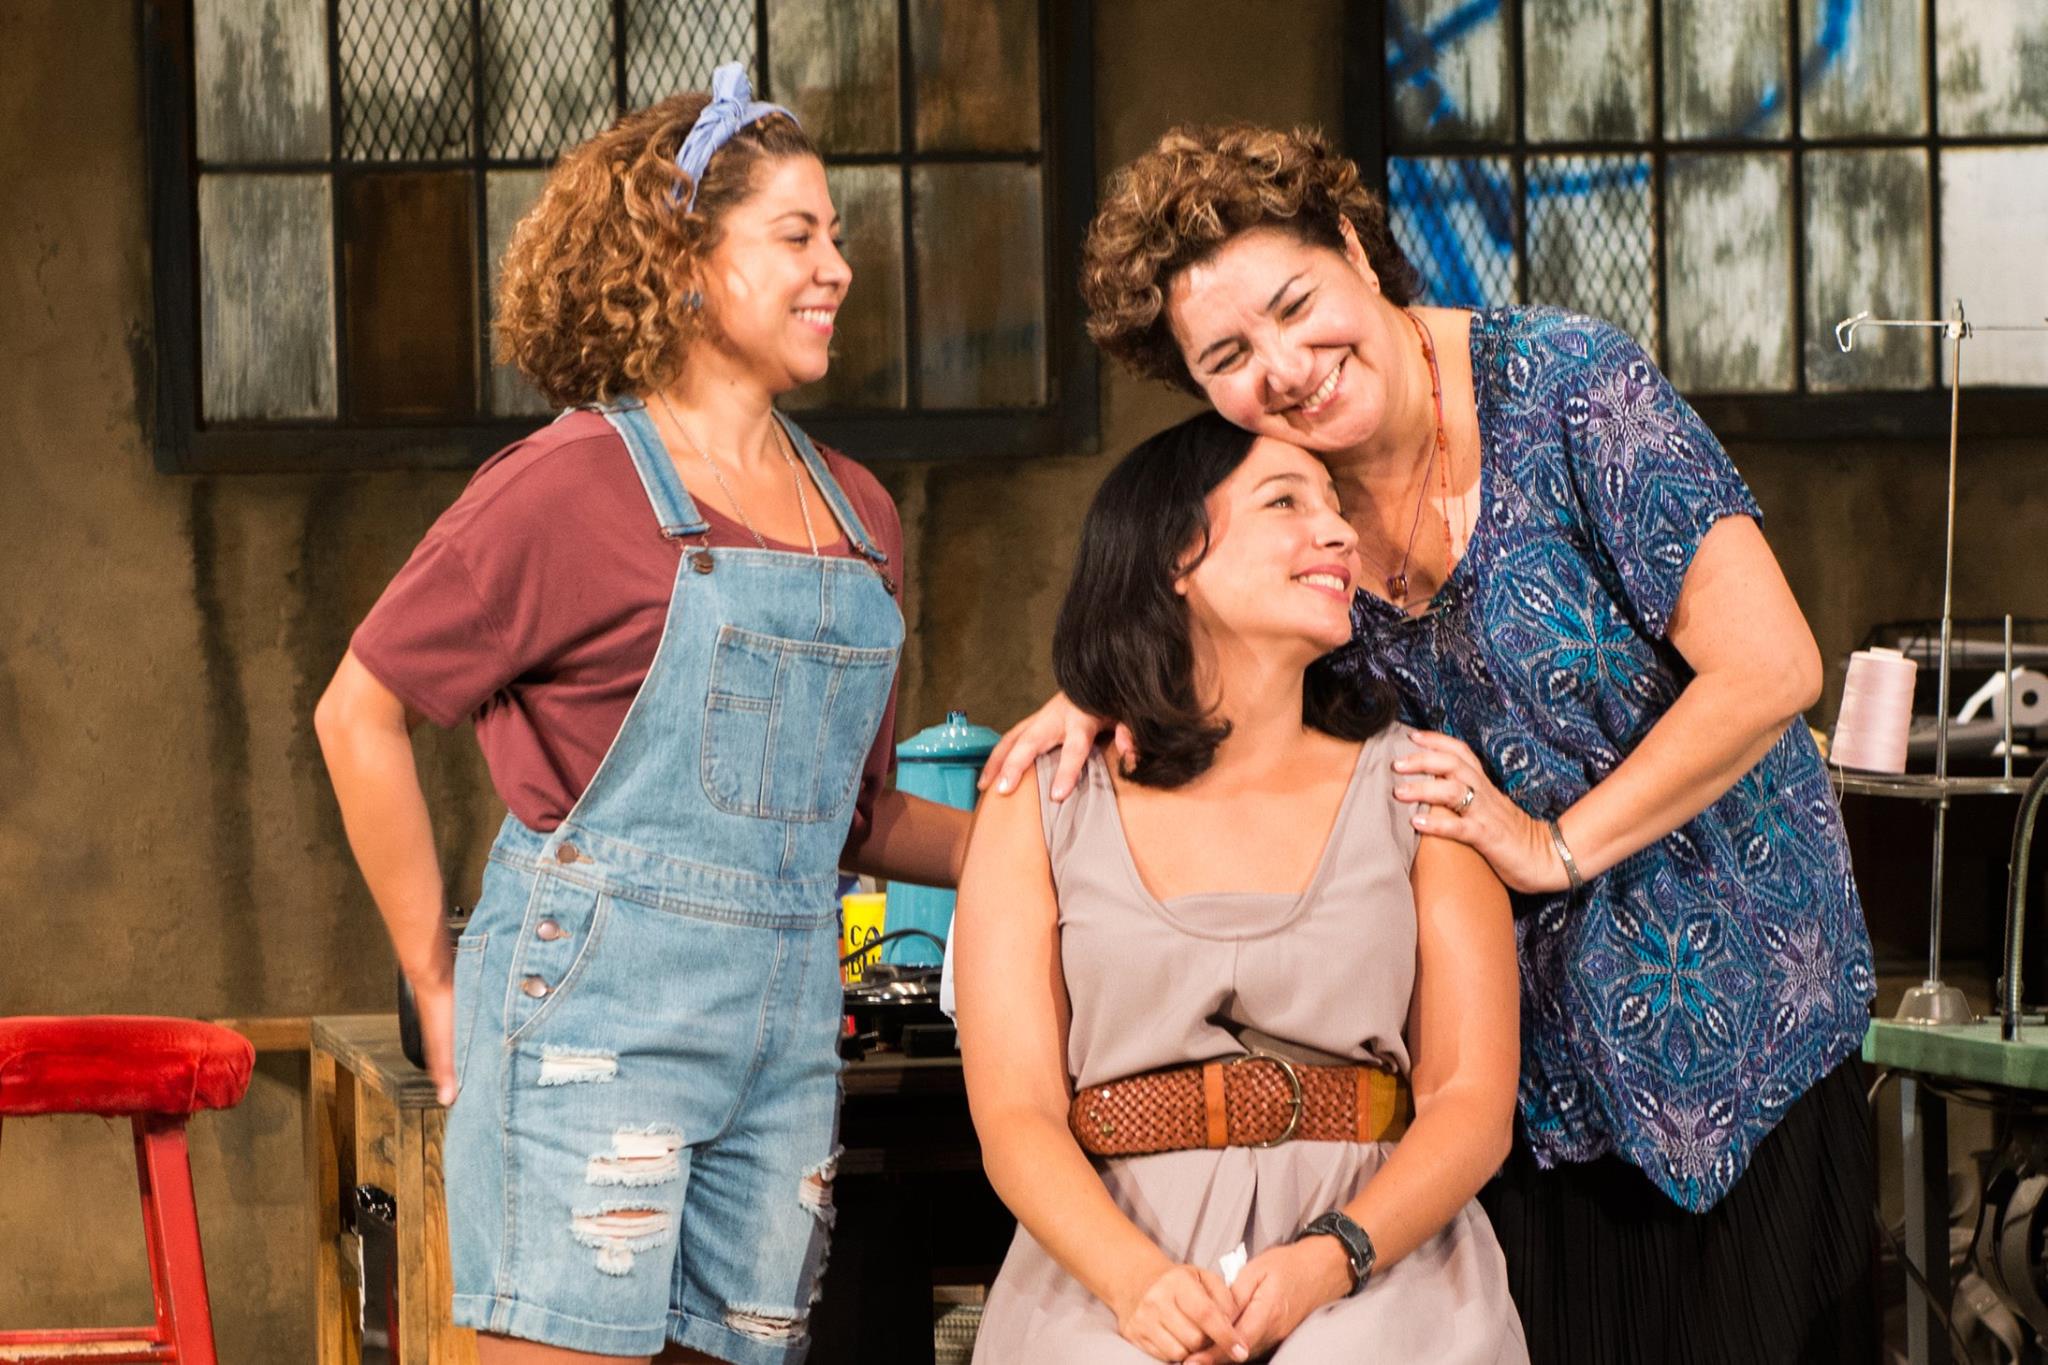 Santana Dempsey, Cristina Frias and Blanca Areceli onstage in Real Women Have Curves at the Pasadena Playhouse